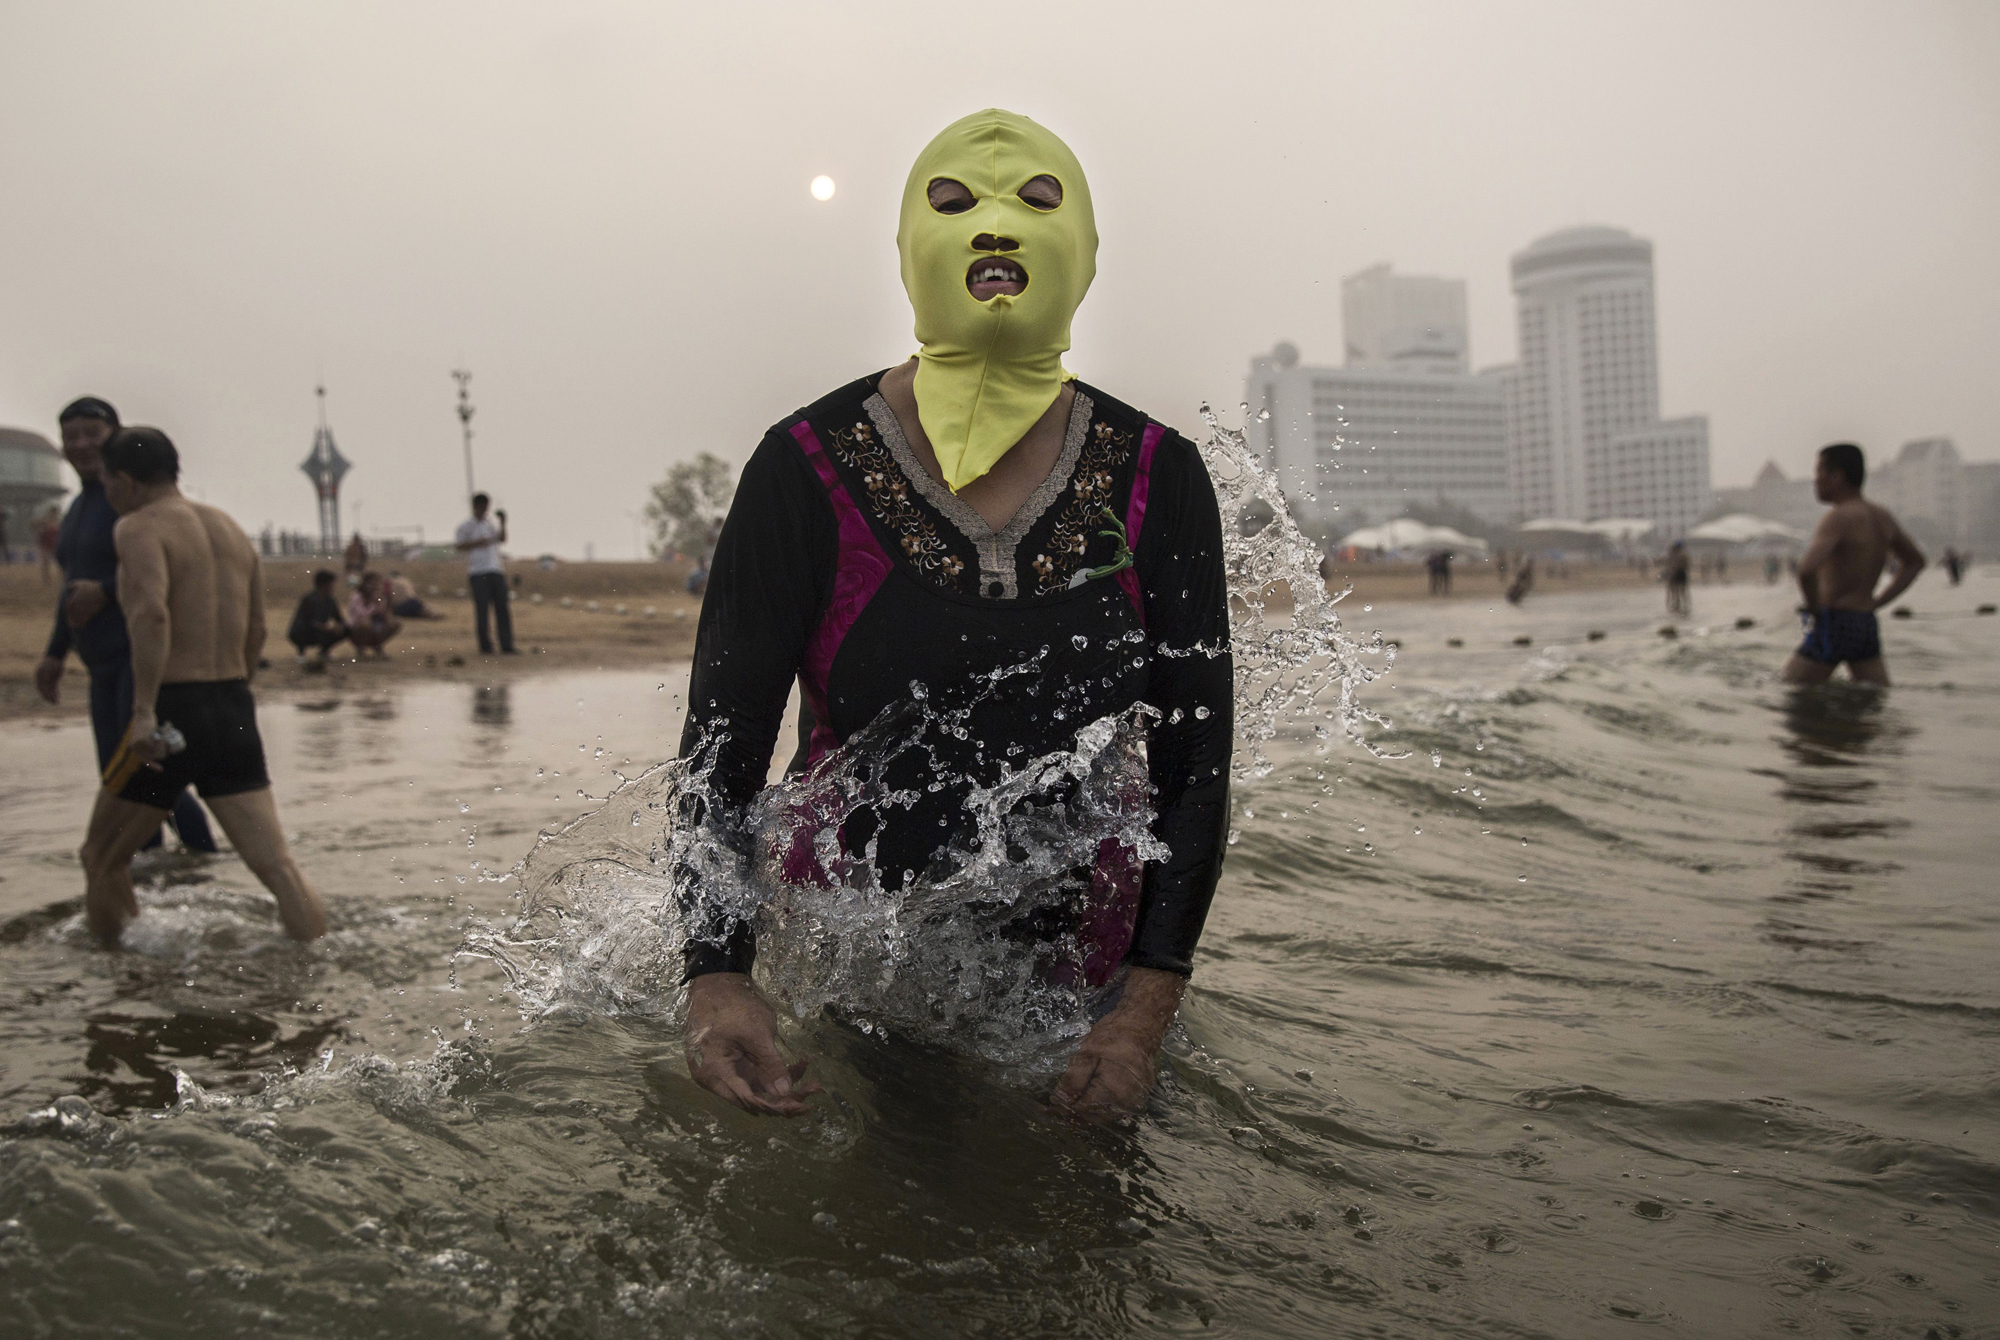 A woman wears a face-kini as she gets wet before swimming on Aug. 22, 2014 on the Yellow Sea in Qingdao.